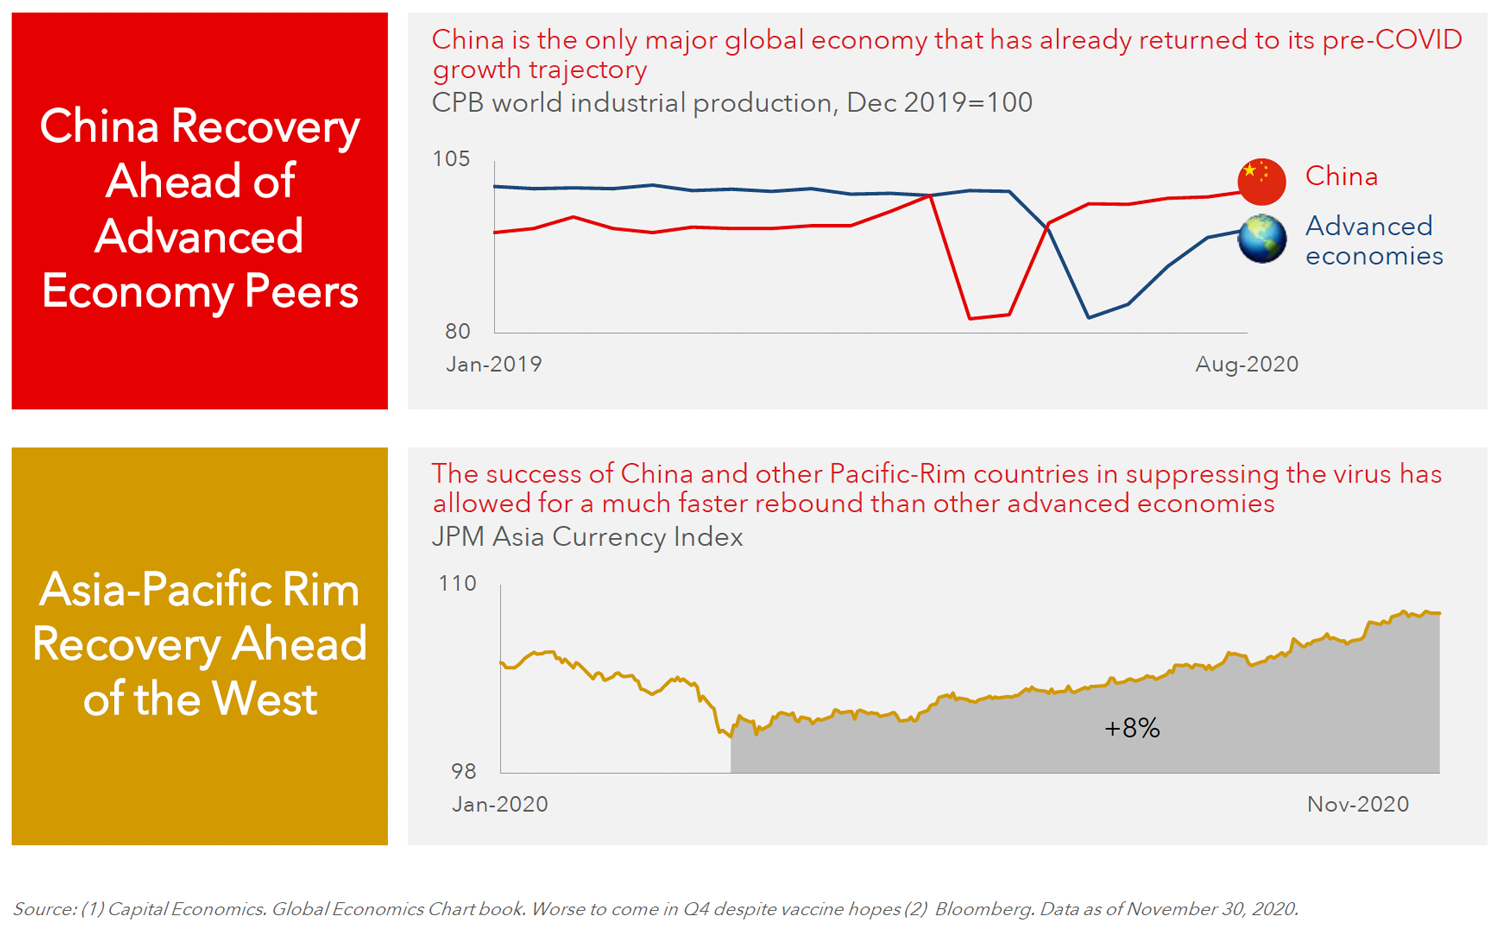 Asia Pacific-Rim Recovery Ahead of the West